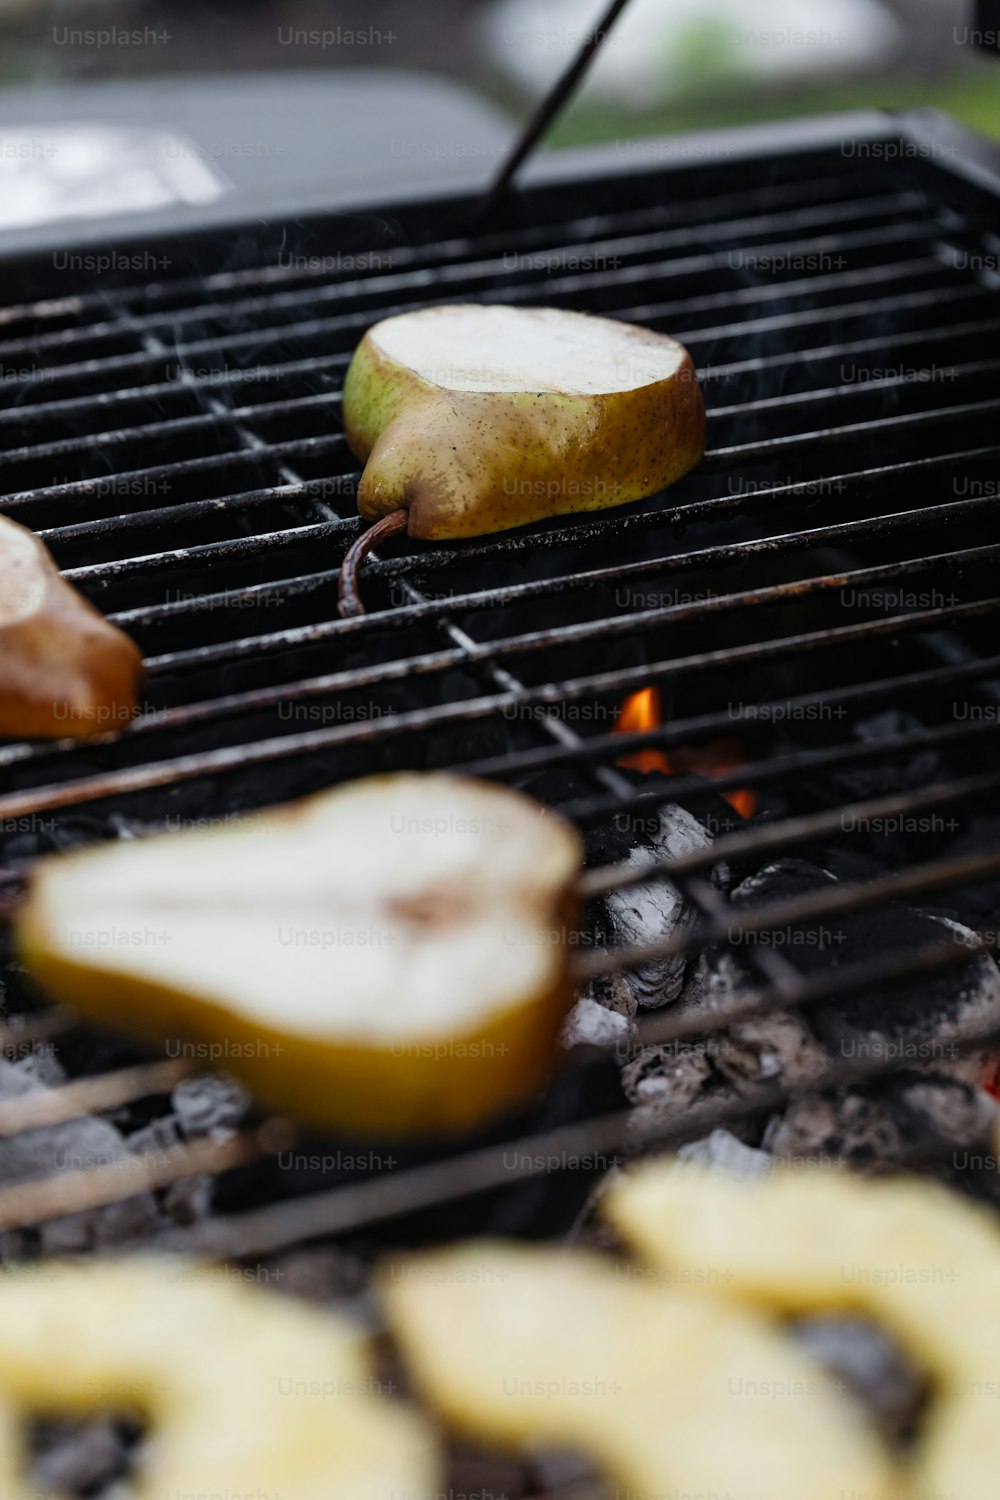 a close up of an apple on a grill